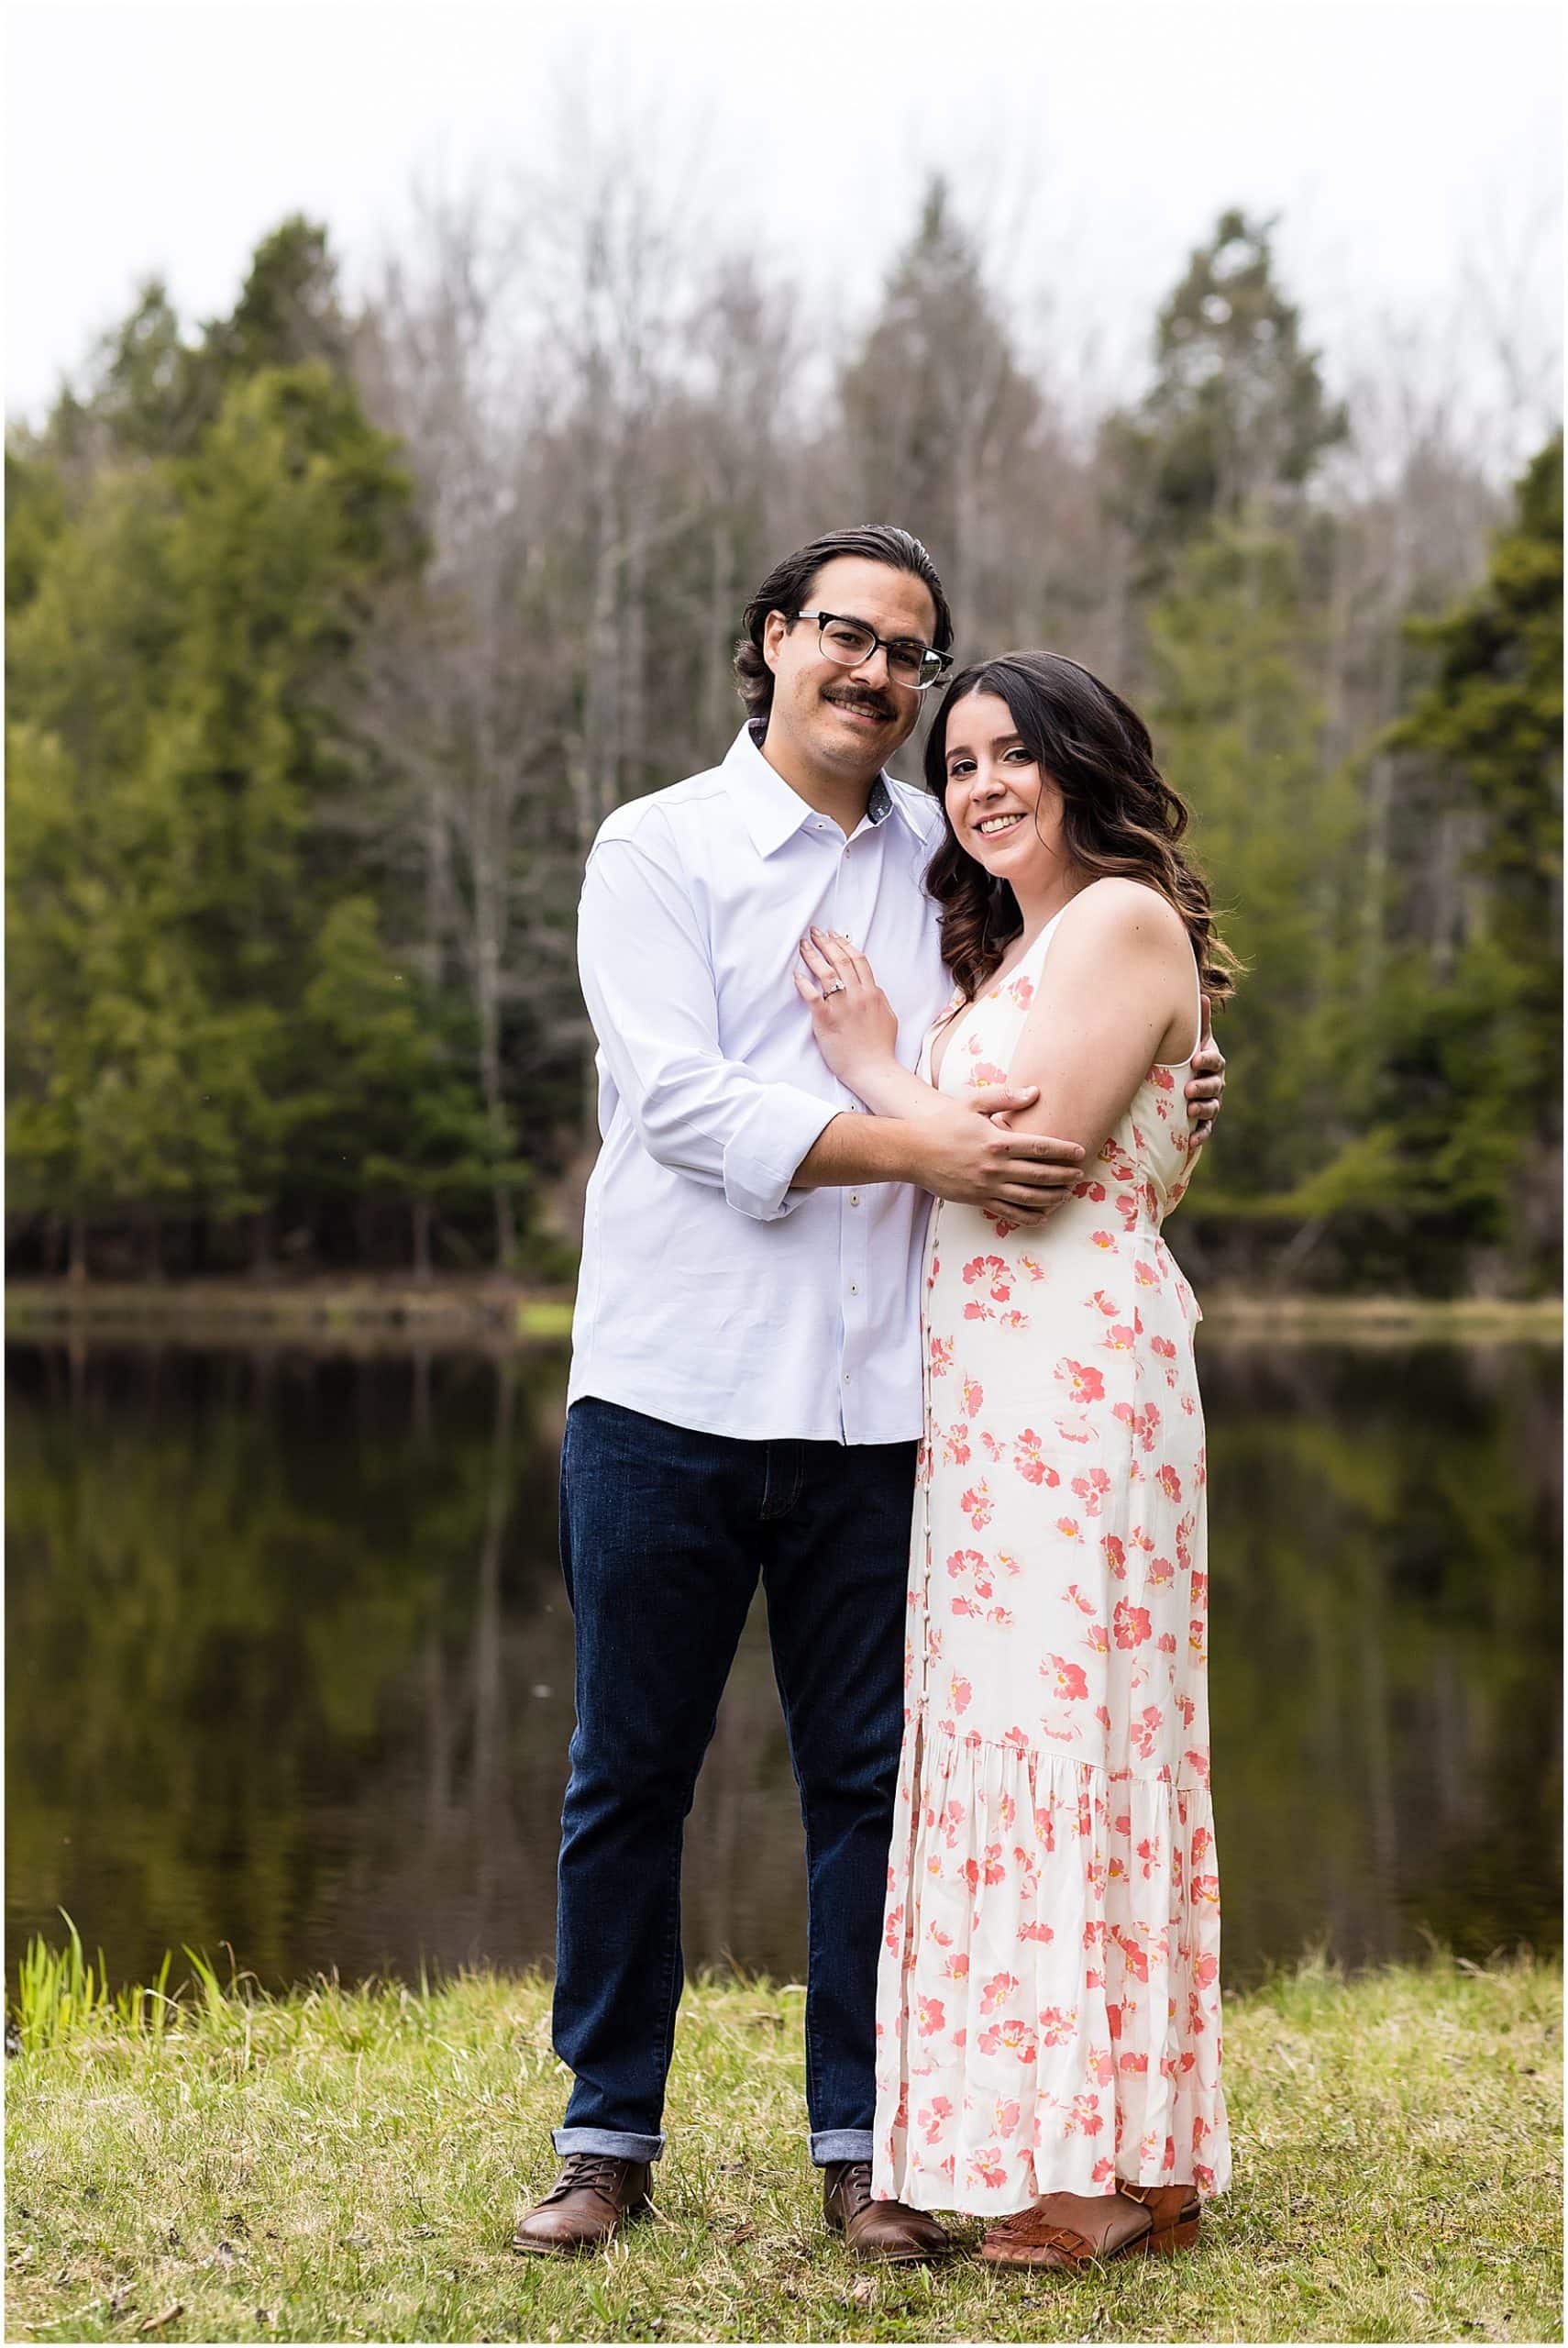 Pocono Mountains engagement session portrait of bride with hand on grooms chest in front of a lake